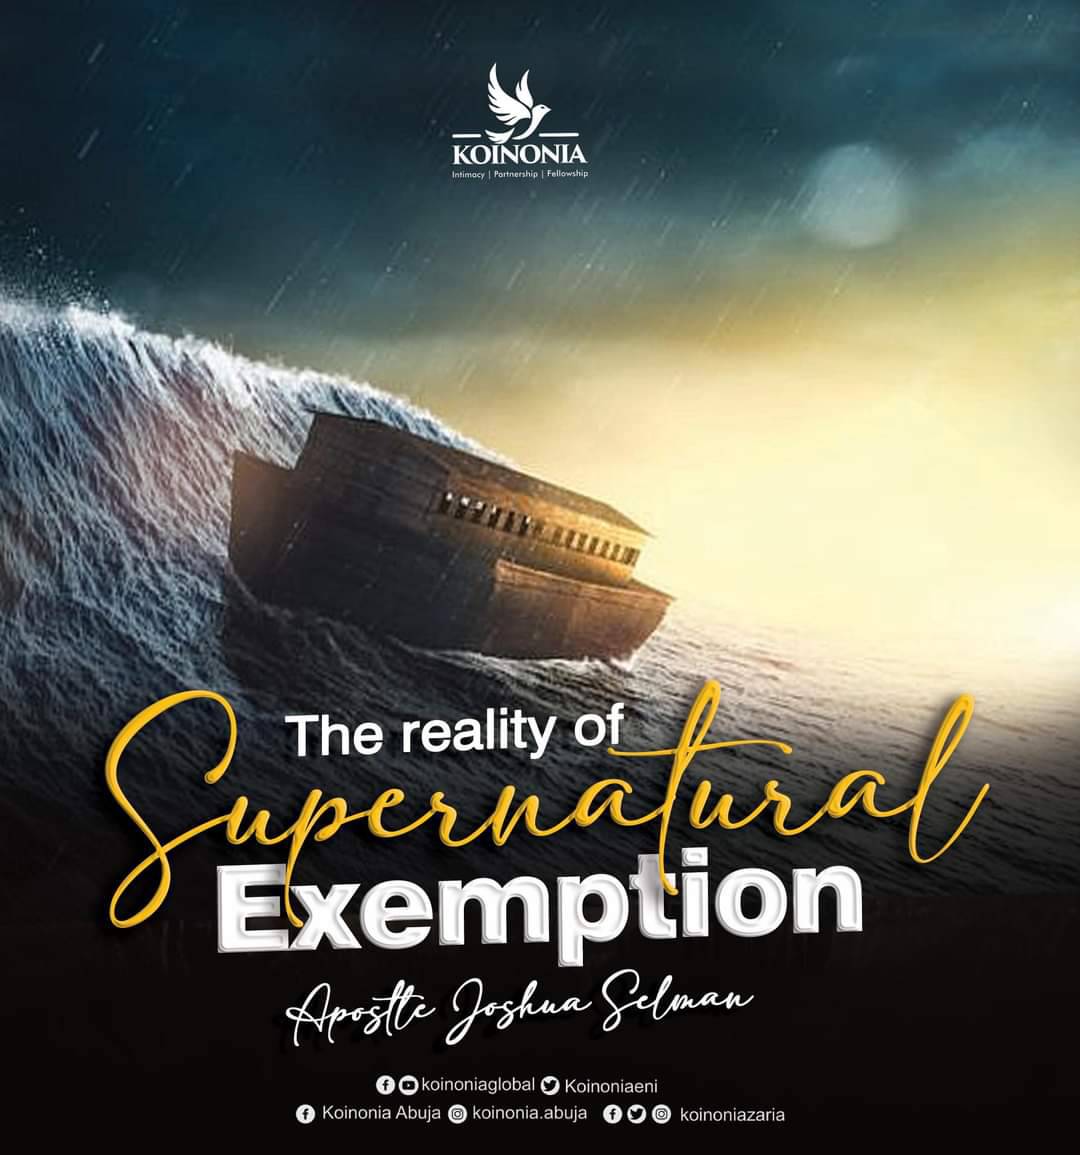 Dear Beloved, kindly click on the link bit.ly/3MlUKDu to download the audio message of 'THE REALITY OF SUPERNATURAL EXEMPTION' With Apostle Joshua Selman. #ApostleJoshuaSelman #TheRealityOfSupernaturalExemption #ThisIsKoinonia #KoinoniaGlobal